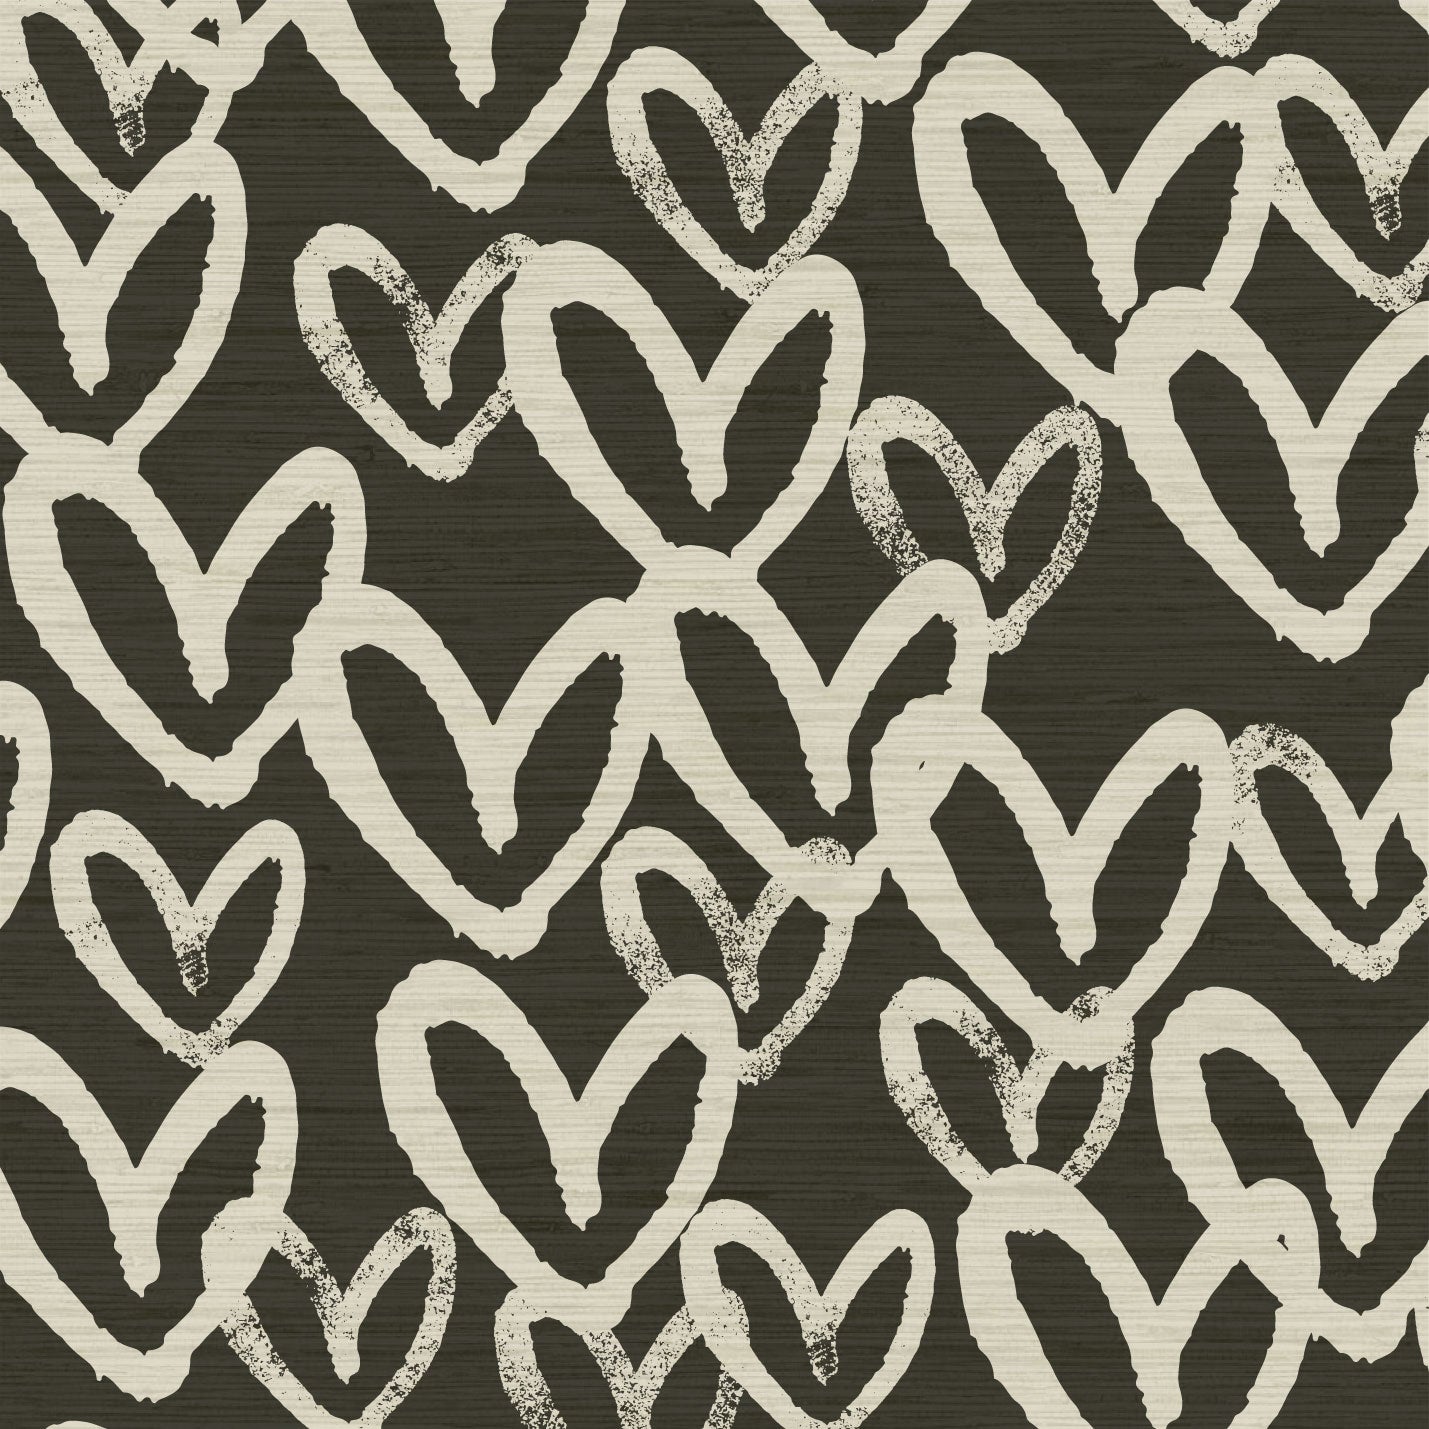 Printed grasscloth wallpaper in allover oversized layered heart print great for kids bedrooms and playroom for a fun and happy wallpaper print design and decor Natural Textured Eco-Friendly Non-toxic High-quality Sustainable Interior Design Bold Custom Tailor-made Retro chic House of Shan Imperfect heart white black